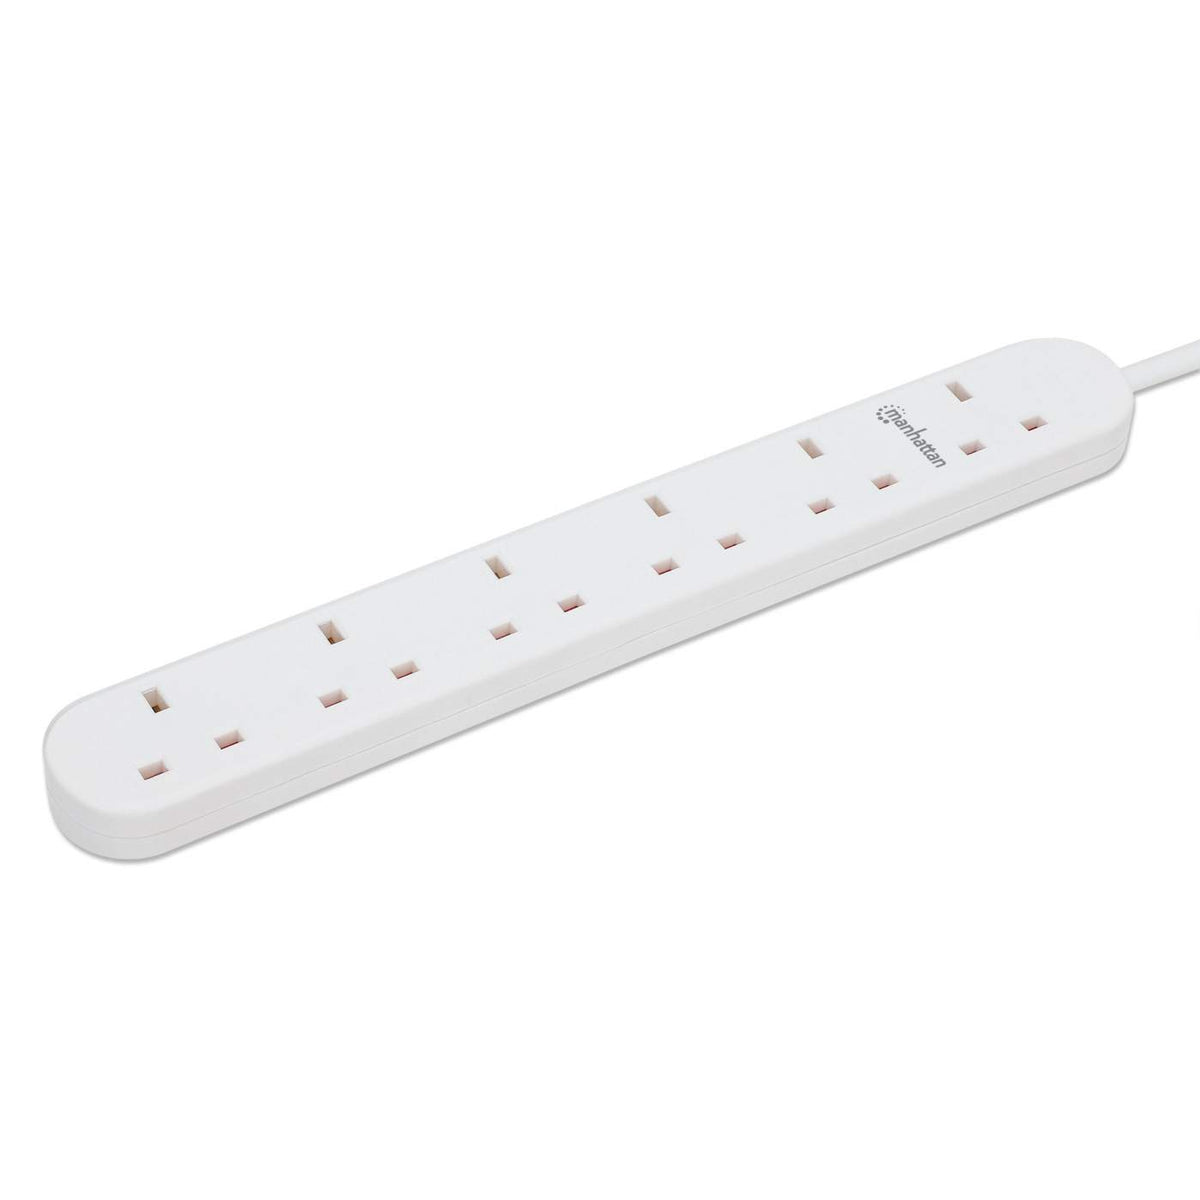 Manhattan Power Strip with 6 Outlets (166829)